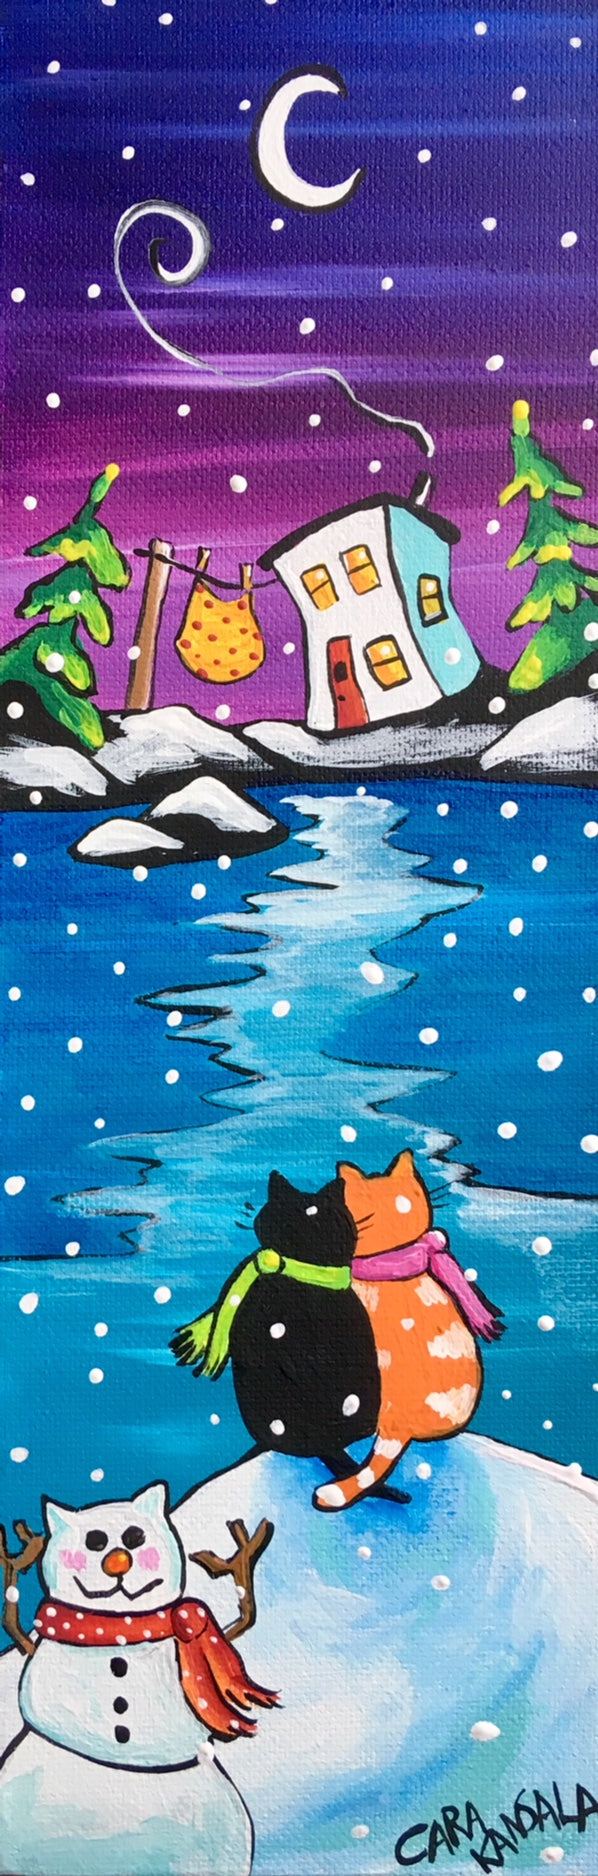 (SOLD)Nan Forgot to Take Our Blanket Off the Line! "Don't Worry," said the Marmalade Cat, "I will Keep You Warm."